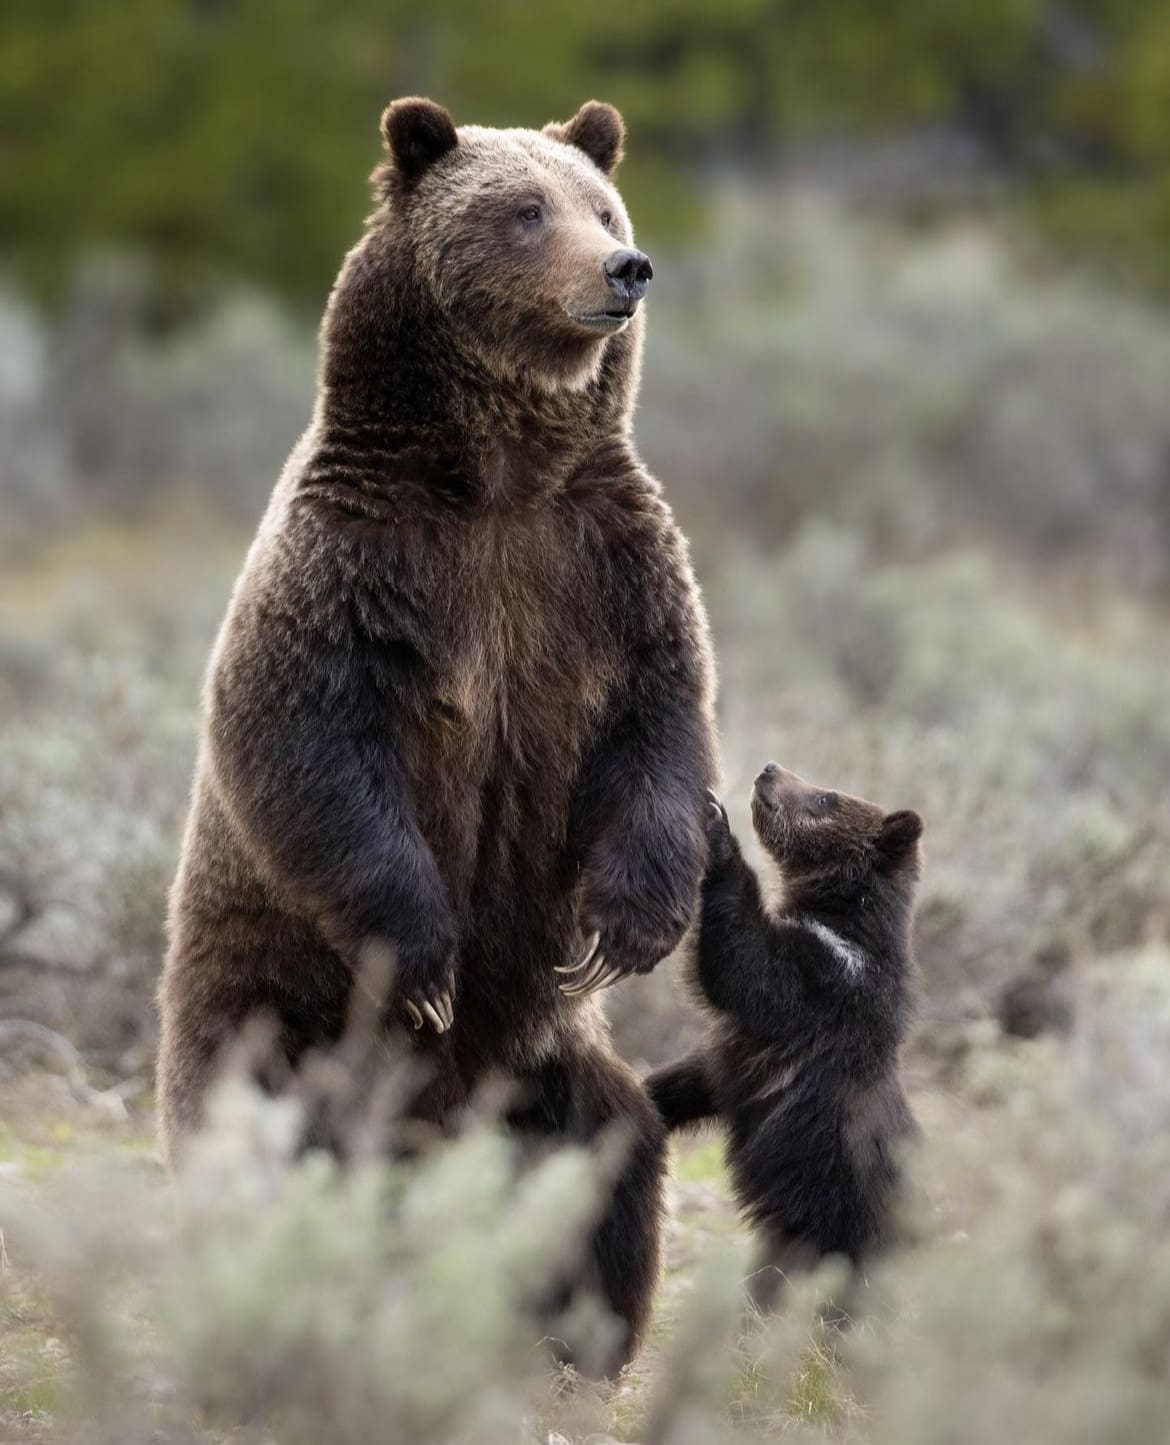 Mother Grizzly and her cub